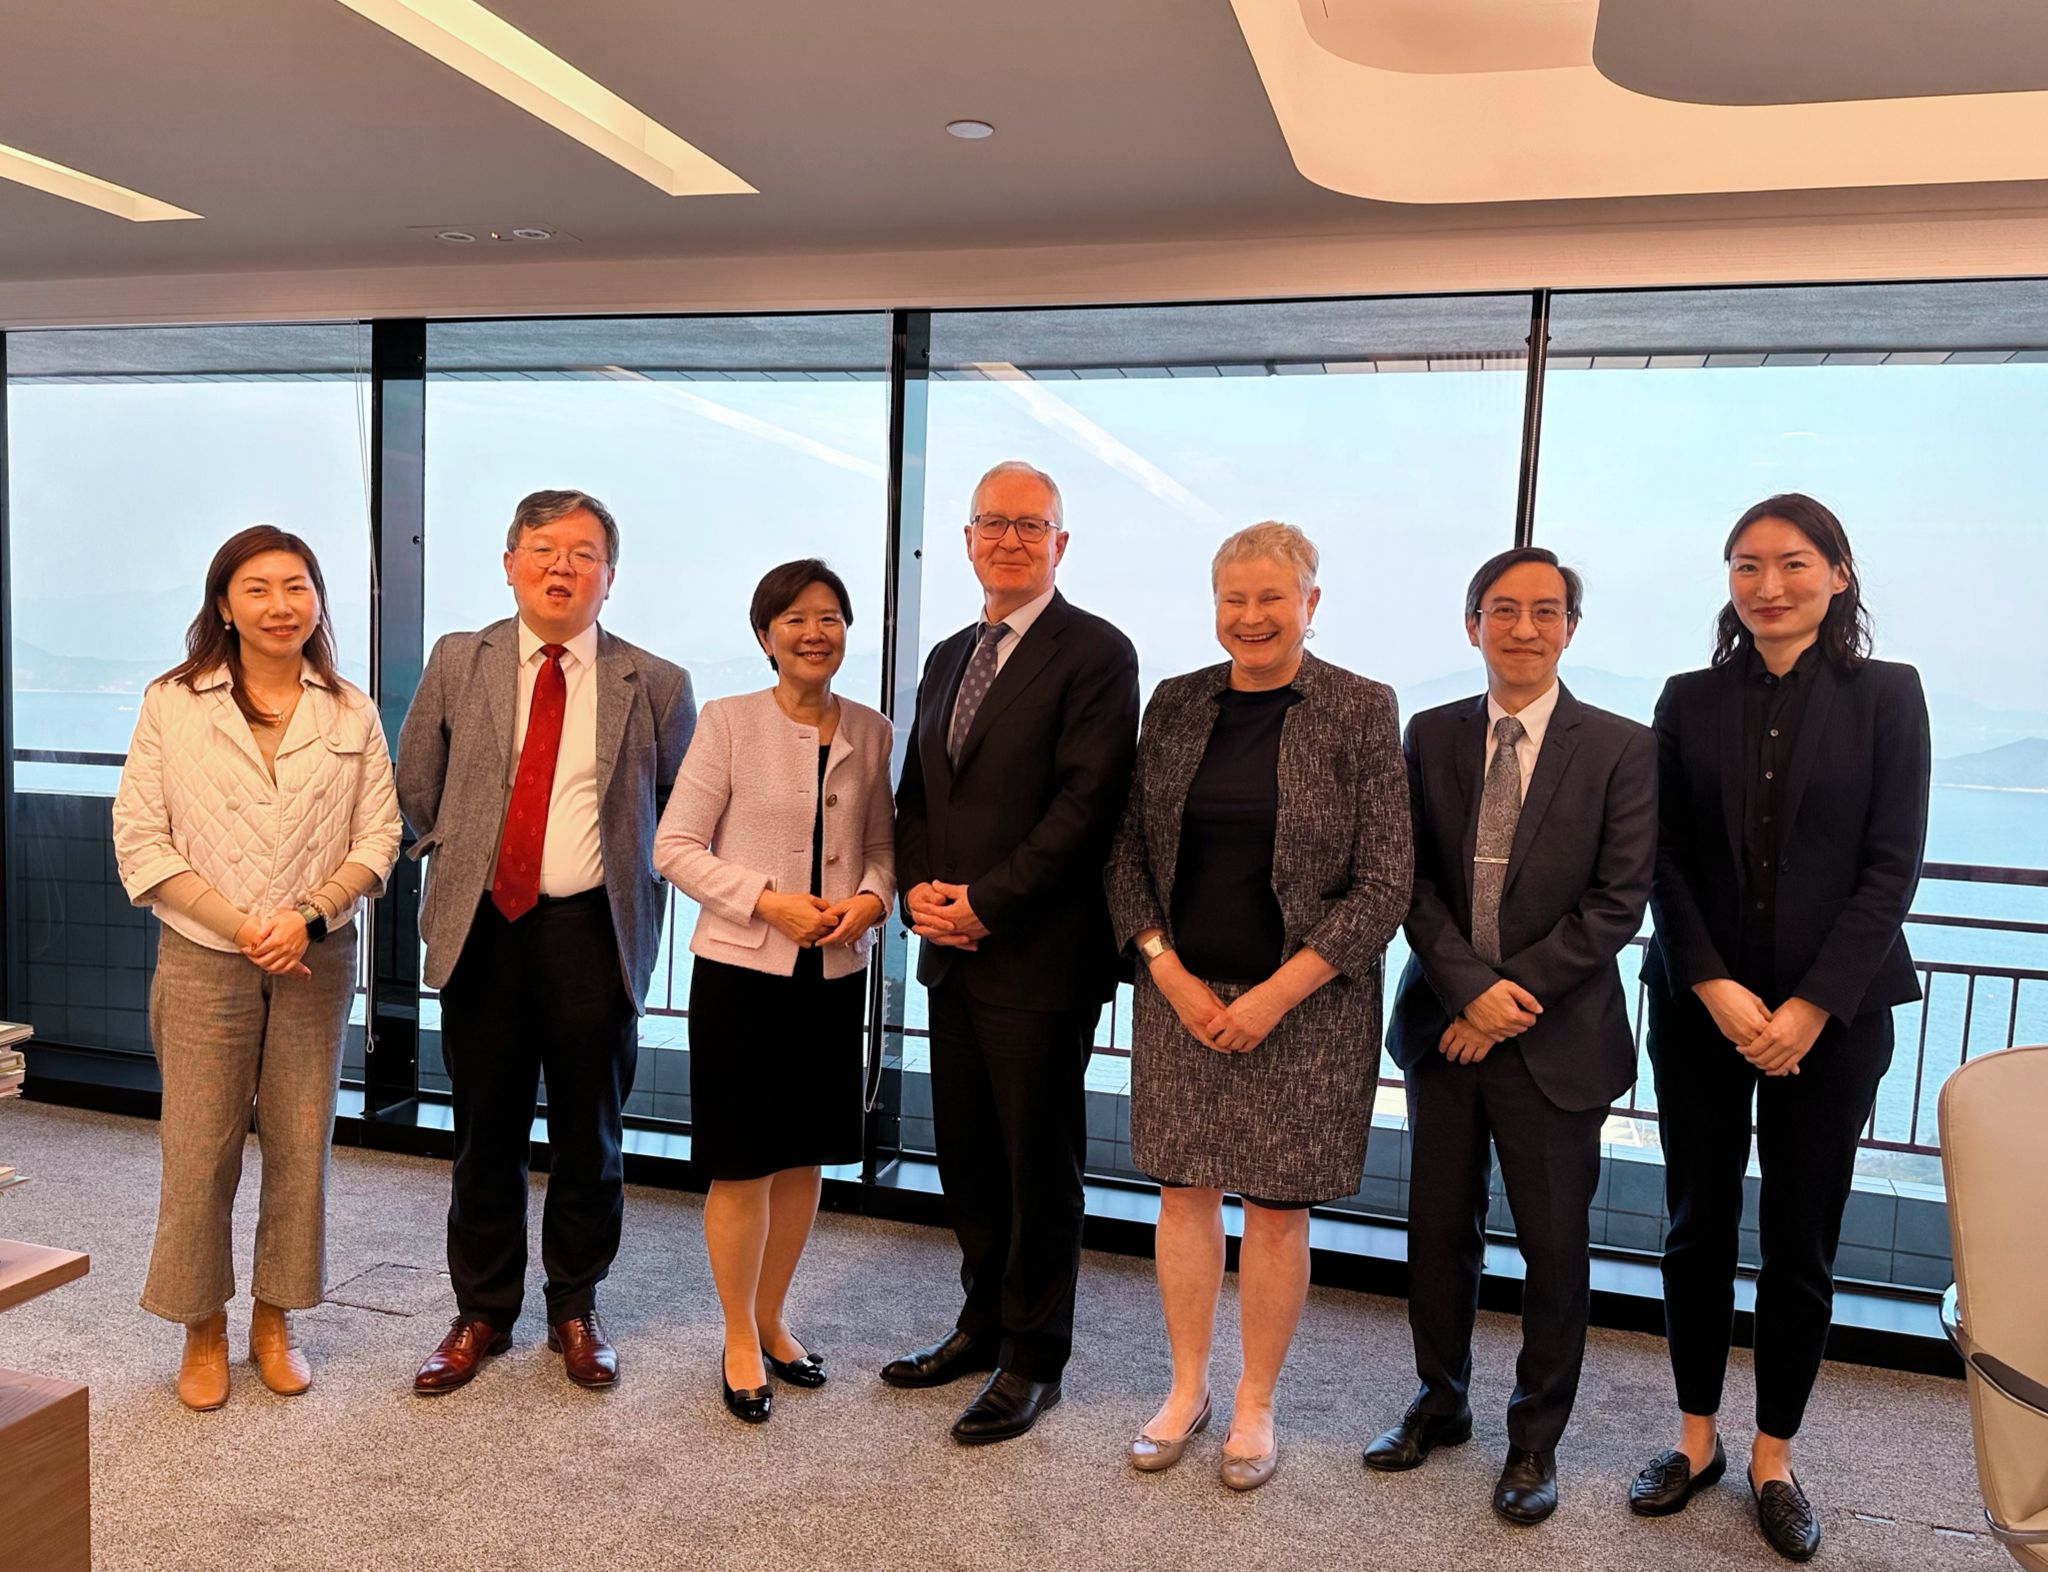 HKUST President Prof. Nancy IP (third left), HKUST Provost Prof. GUO Yike (second left) and other HKUST representatives met with the Imperial College London delegation led by President Prof. Hugh BRADY (center).